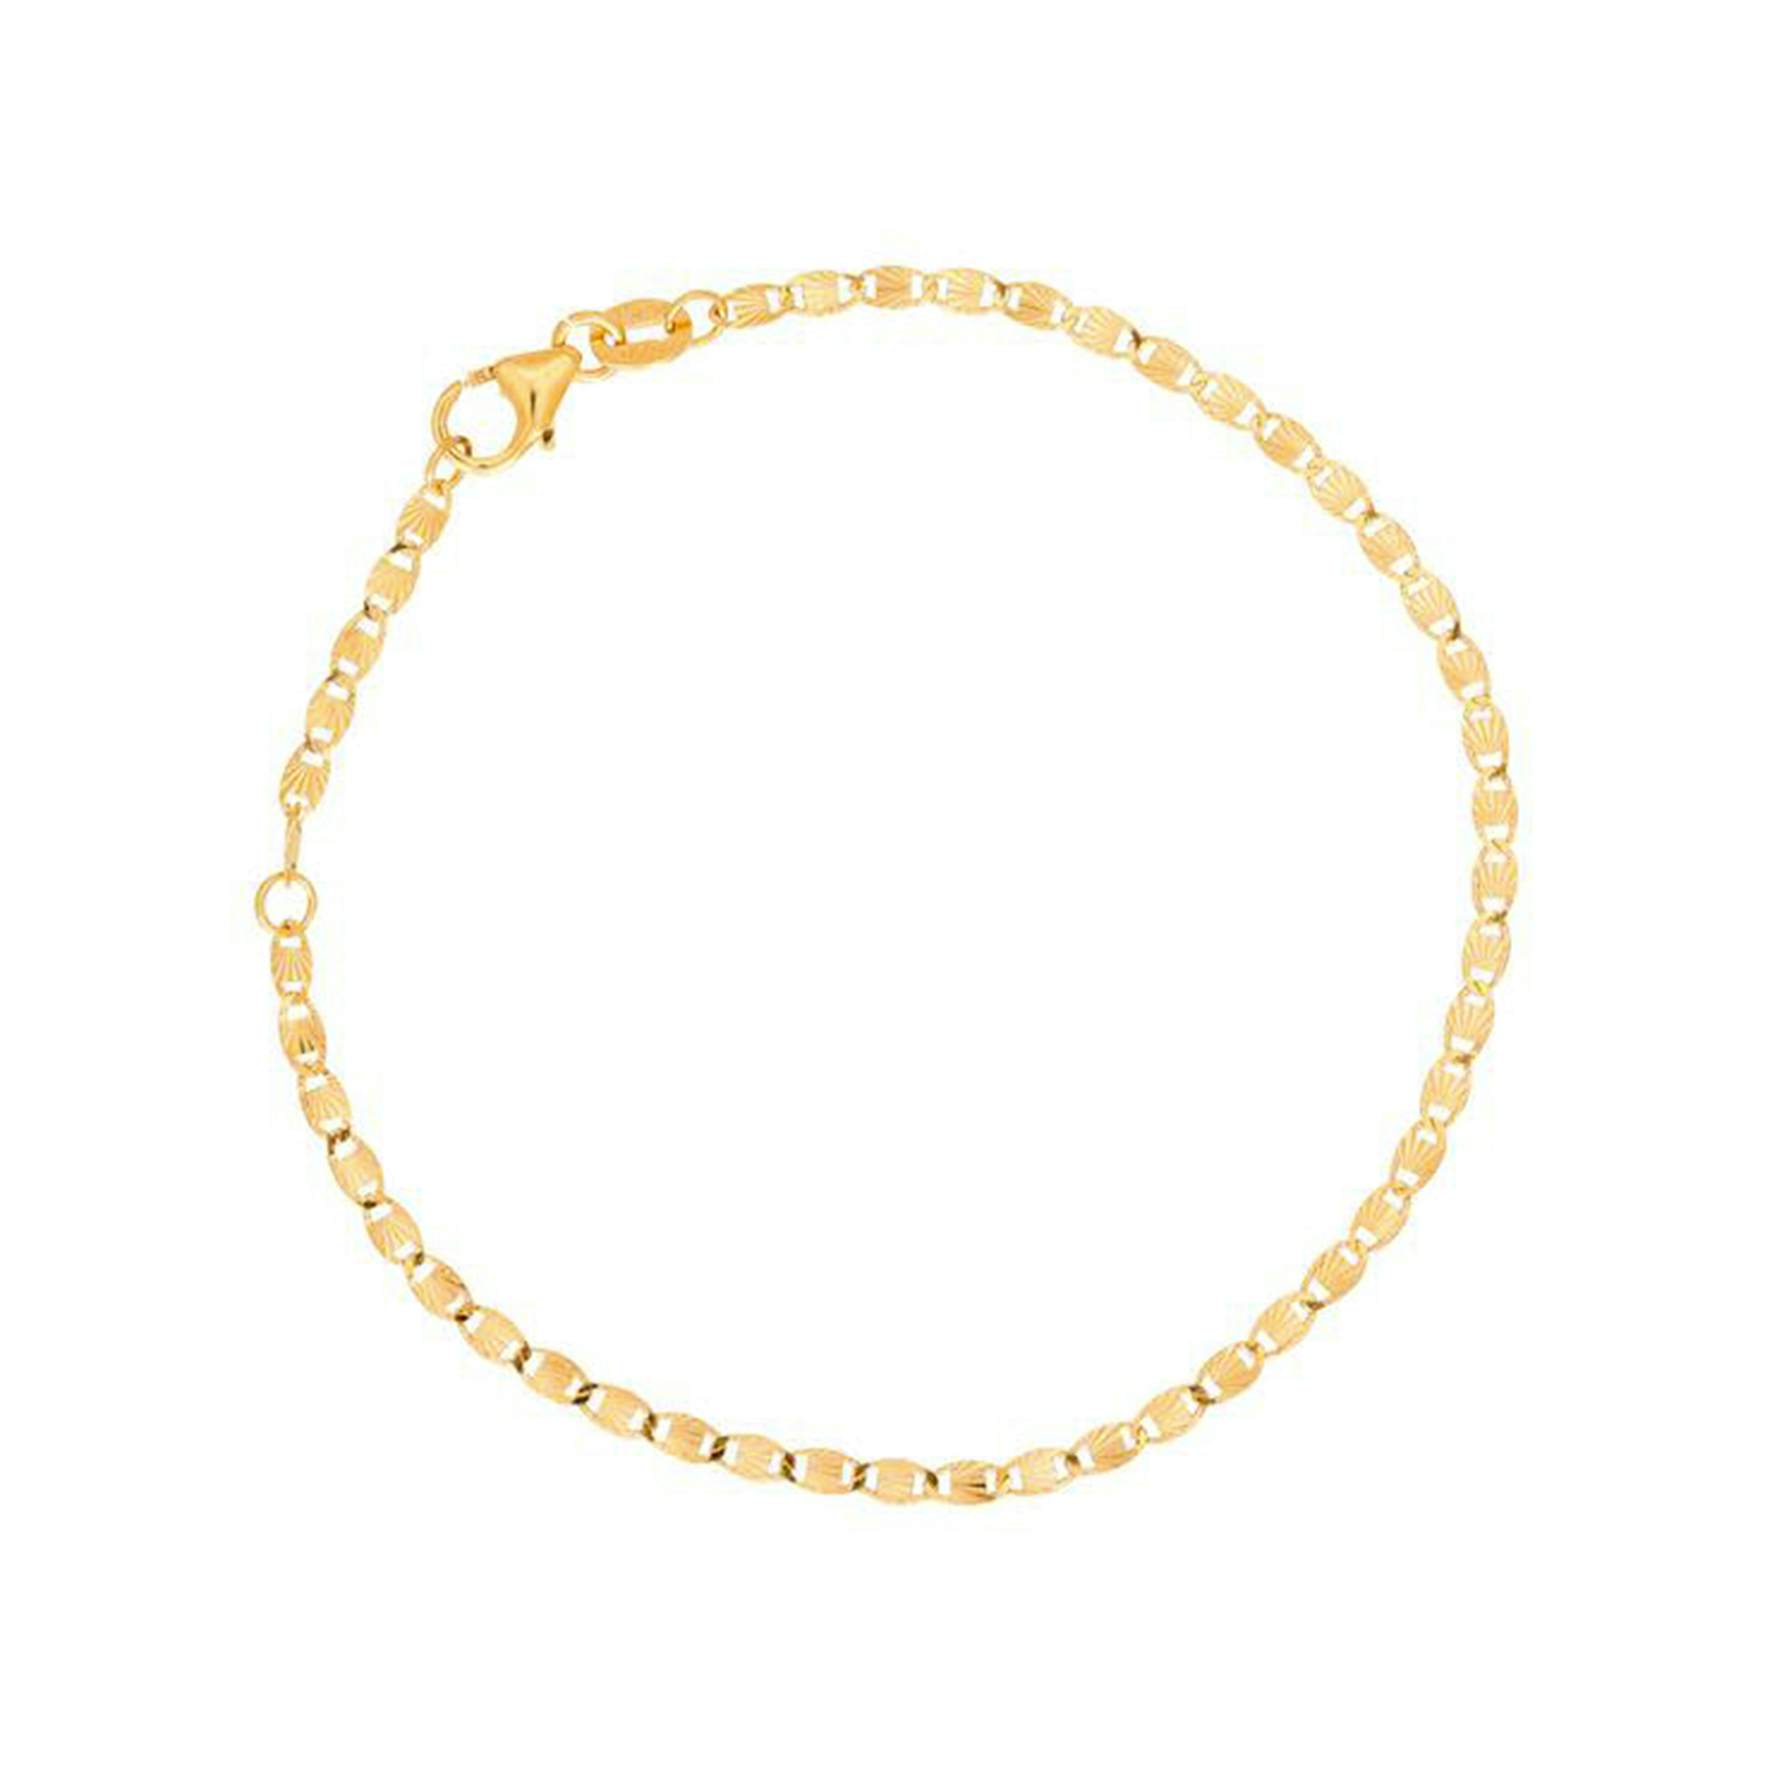 Gilly Bracelet from Pico in Goldplated-Silver Sterling 925